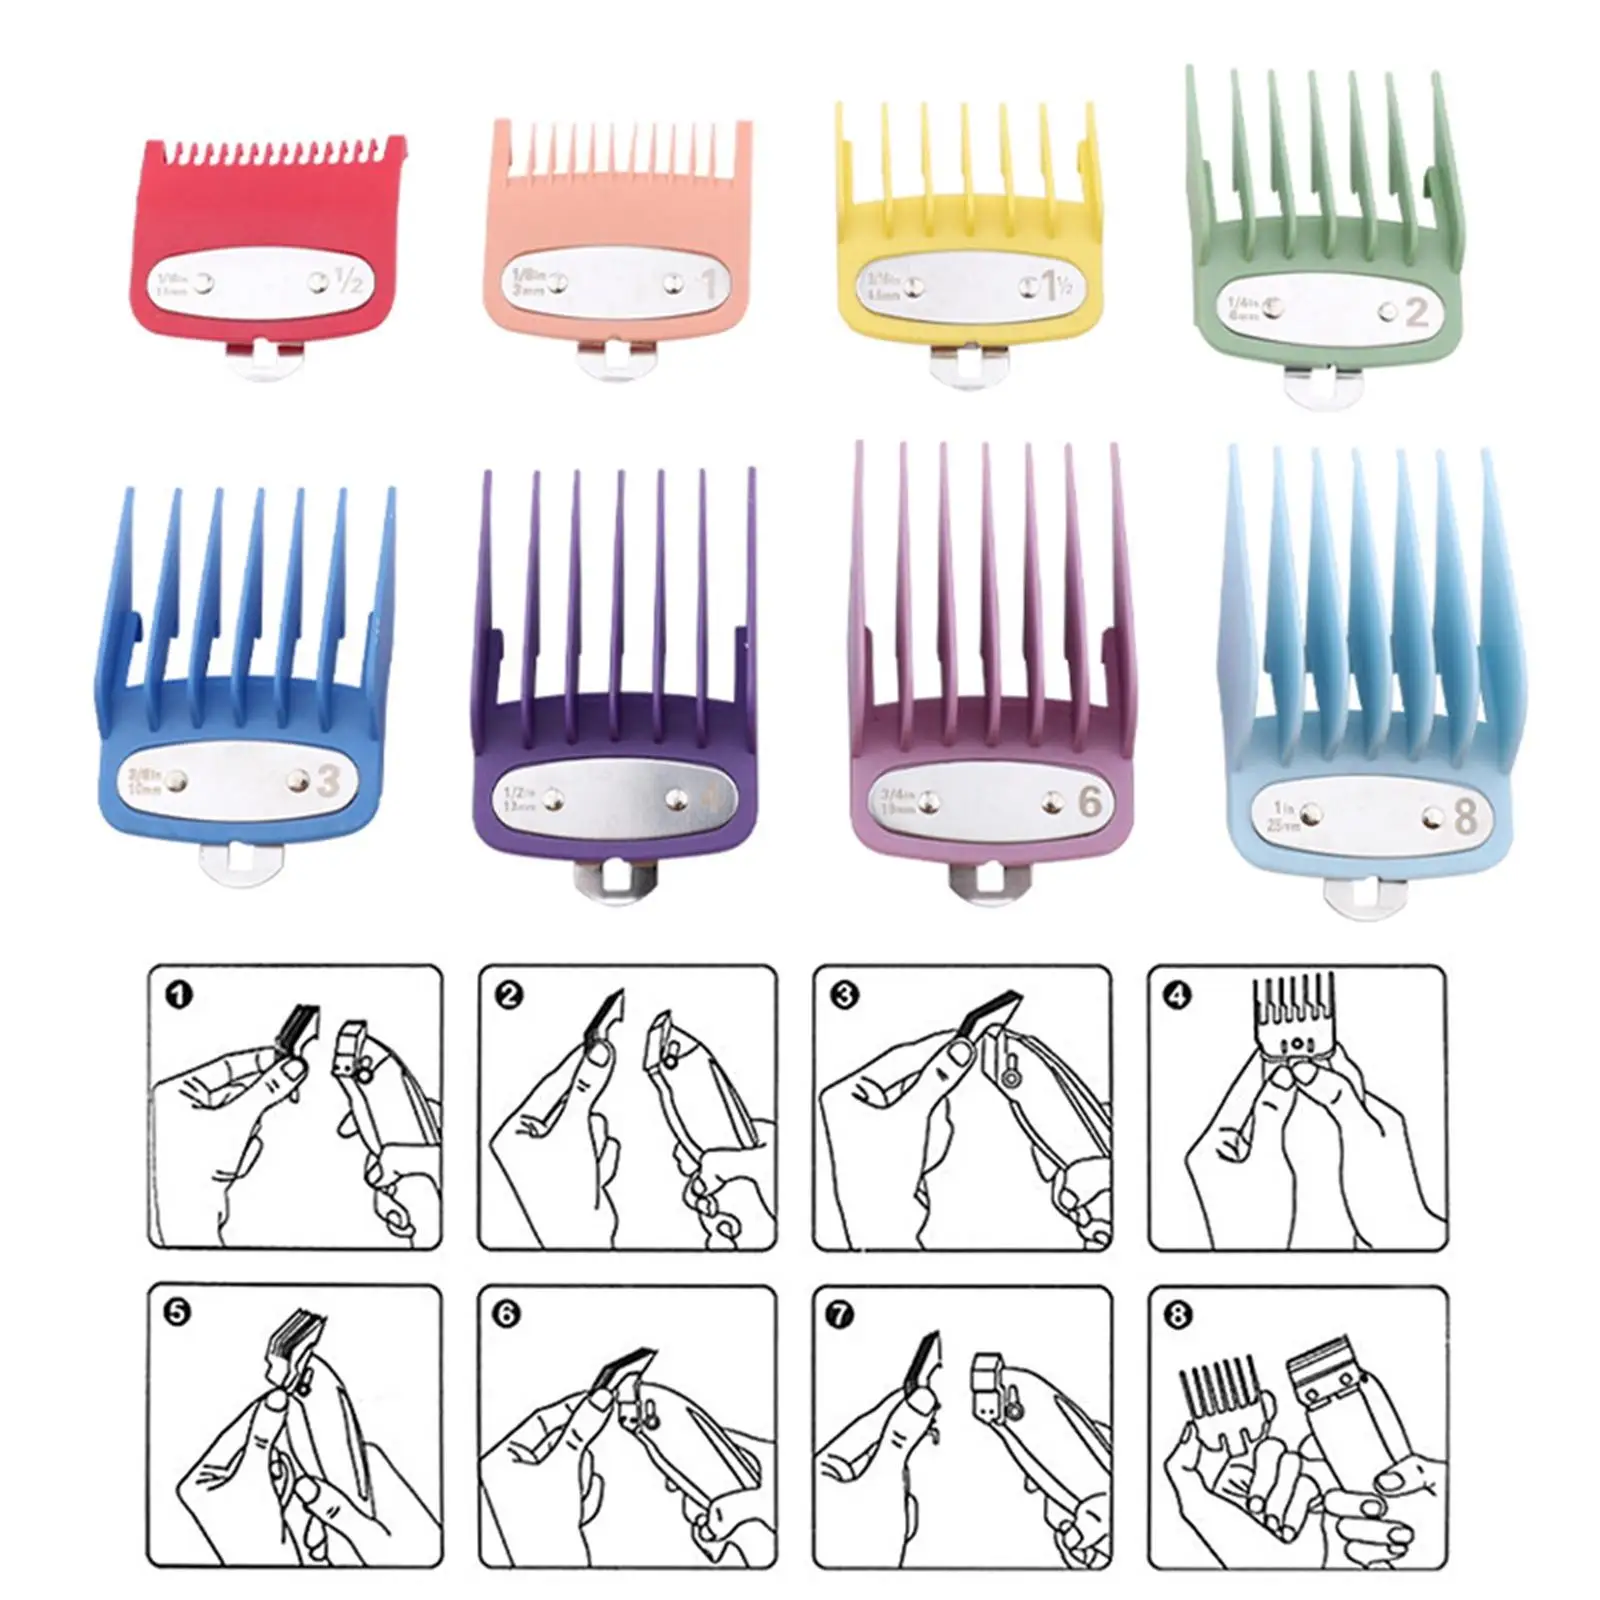 8 Pieces Hair Clipper Guards Professional Attachment Hair Cutting Guide Combs Set for Wahl Hair Clippers Trimmers Barber